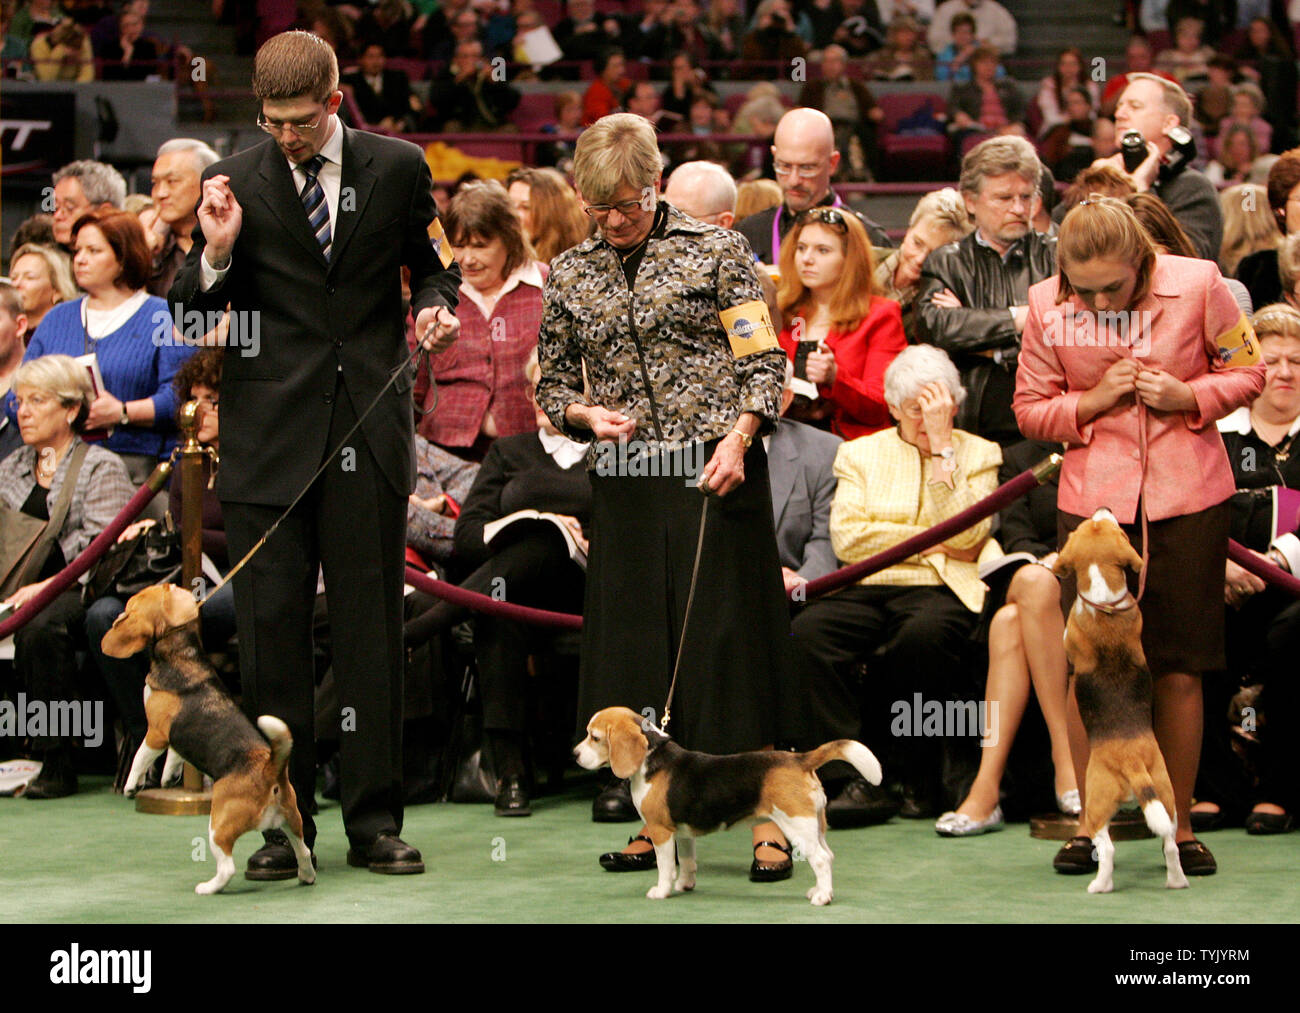 Handlers with their 13-inch Beagles wait for the judge's ruling during the  133rd Westminster Kennel Club Dog Show held at Madison Square Garden on  February 9, 2009 in New York City. The